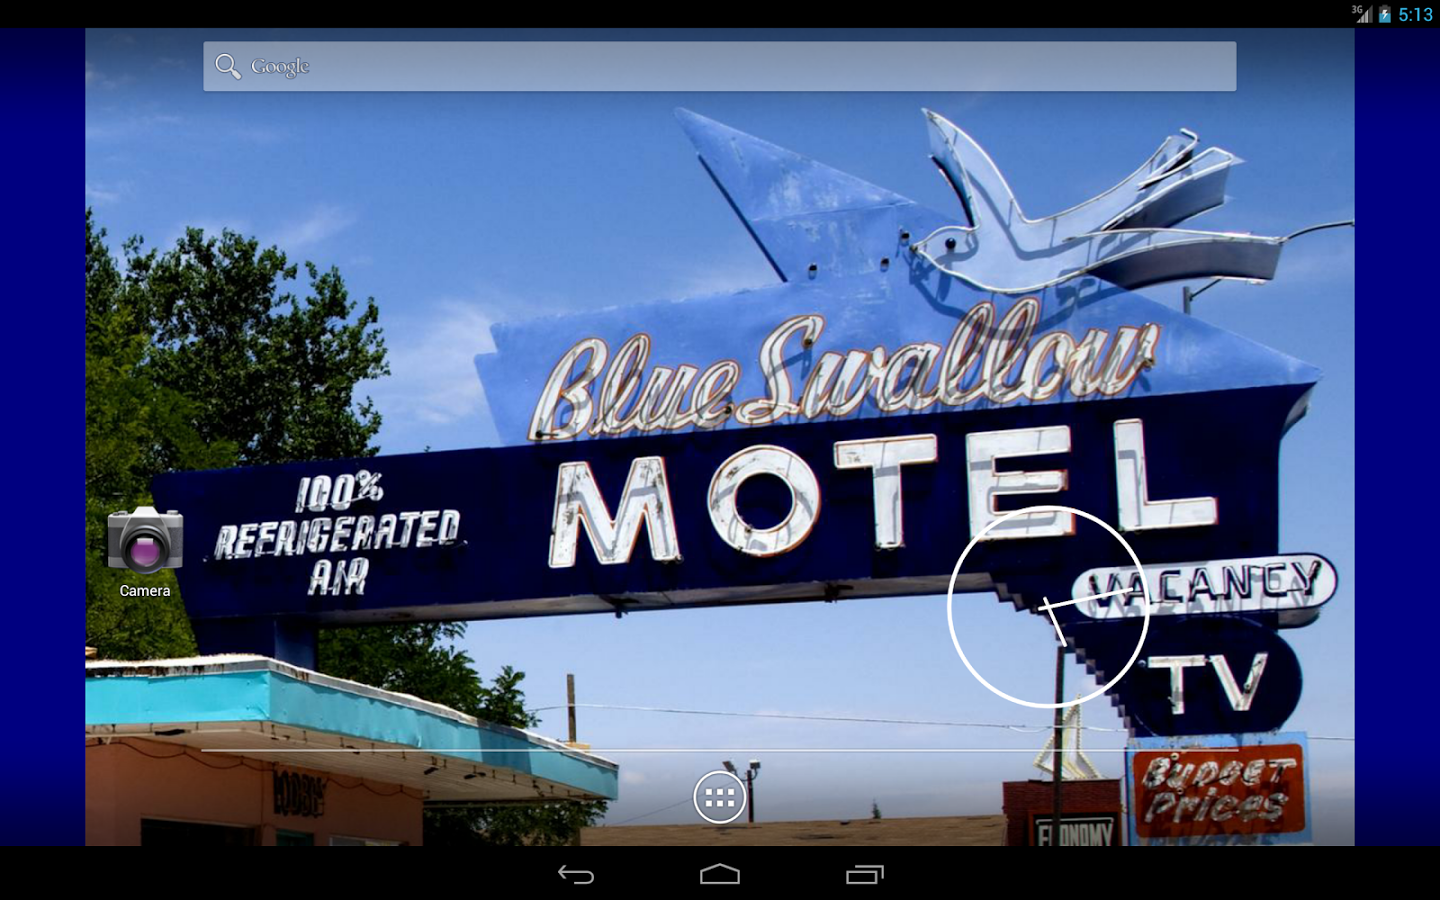 Route New Mexico Wallpaper Android Apps On Google Play